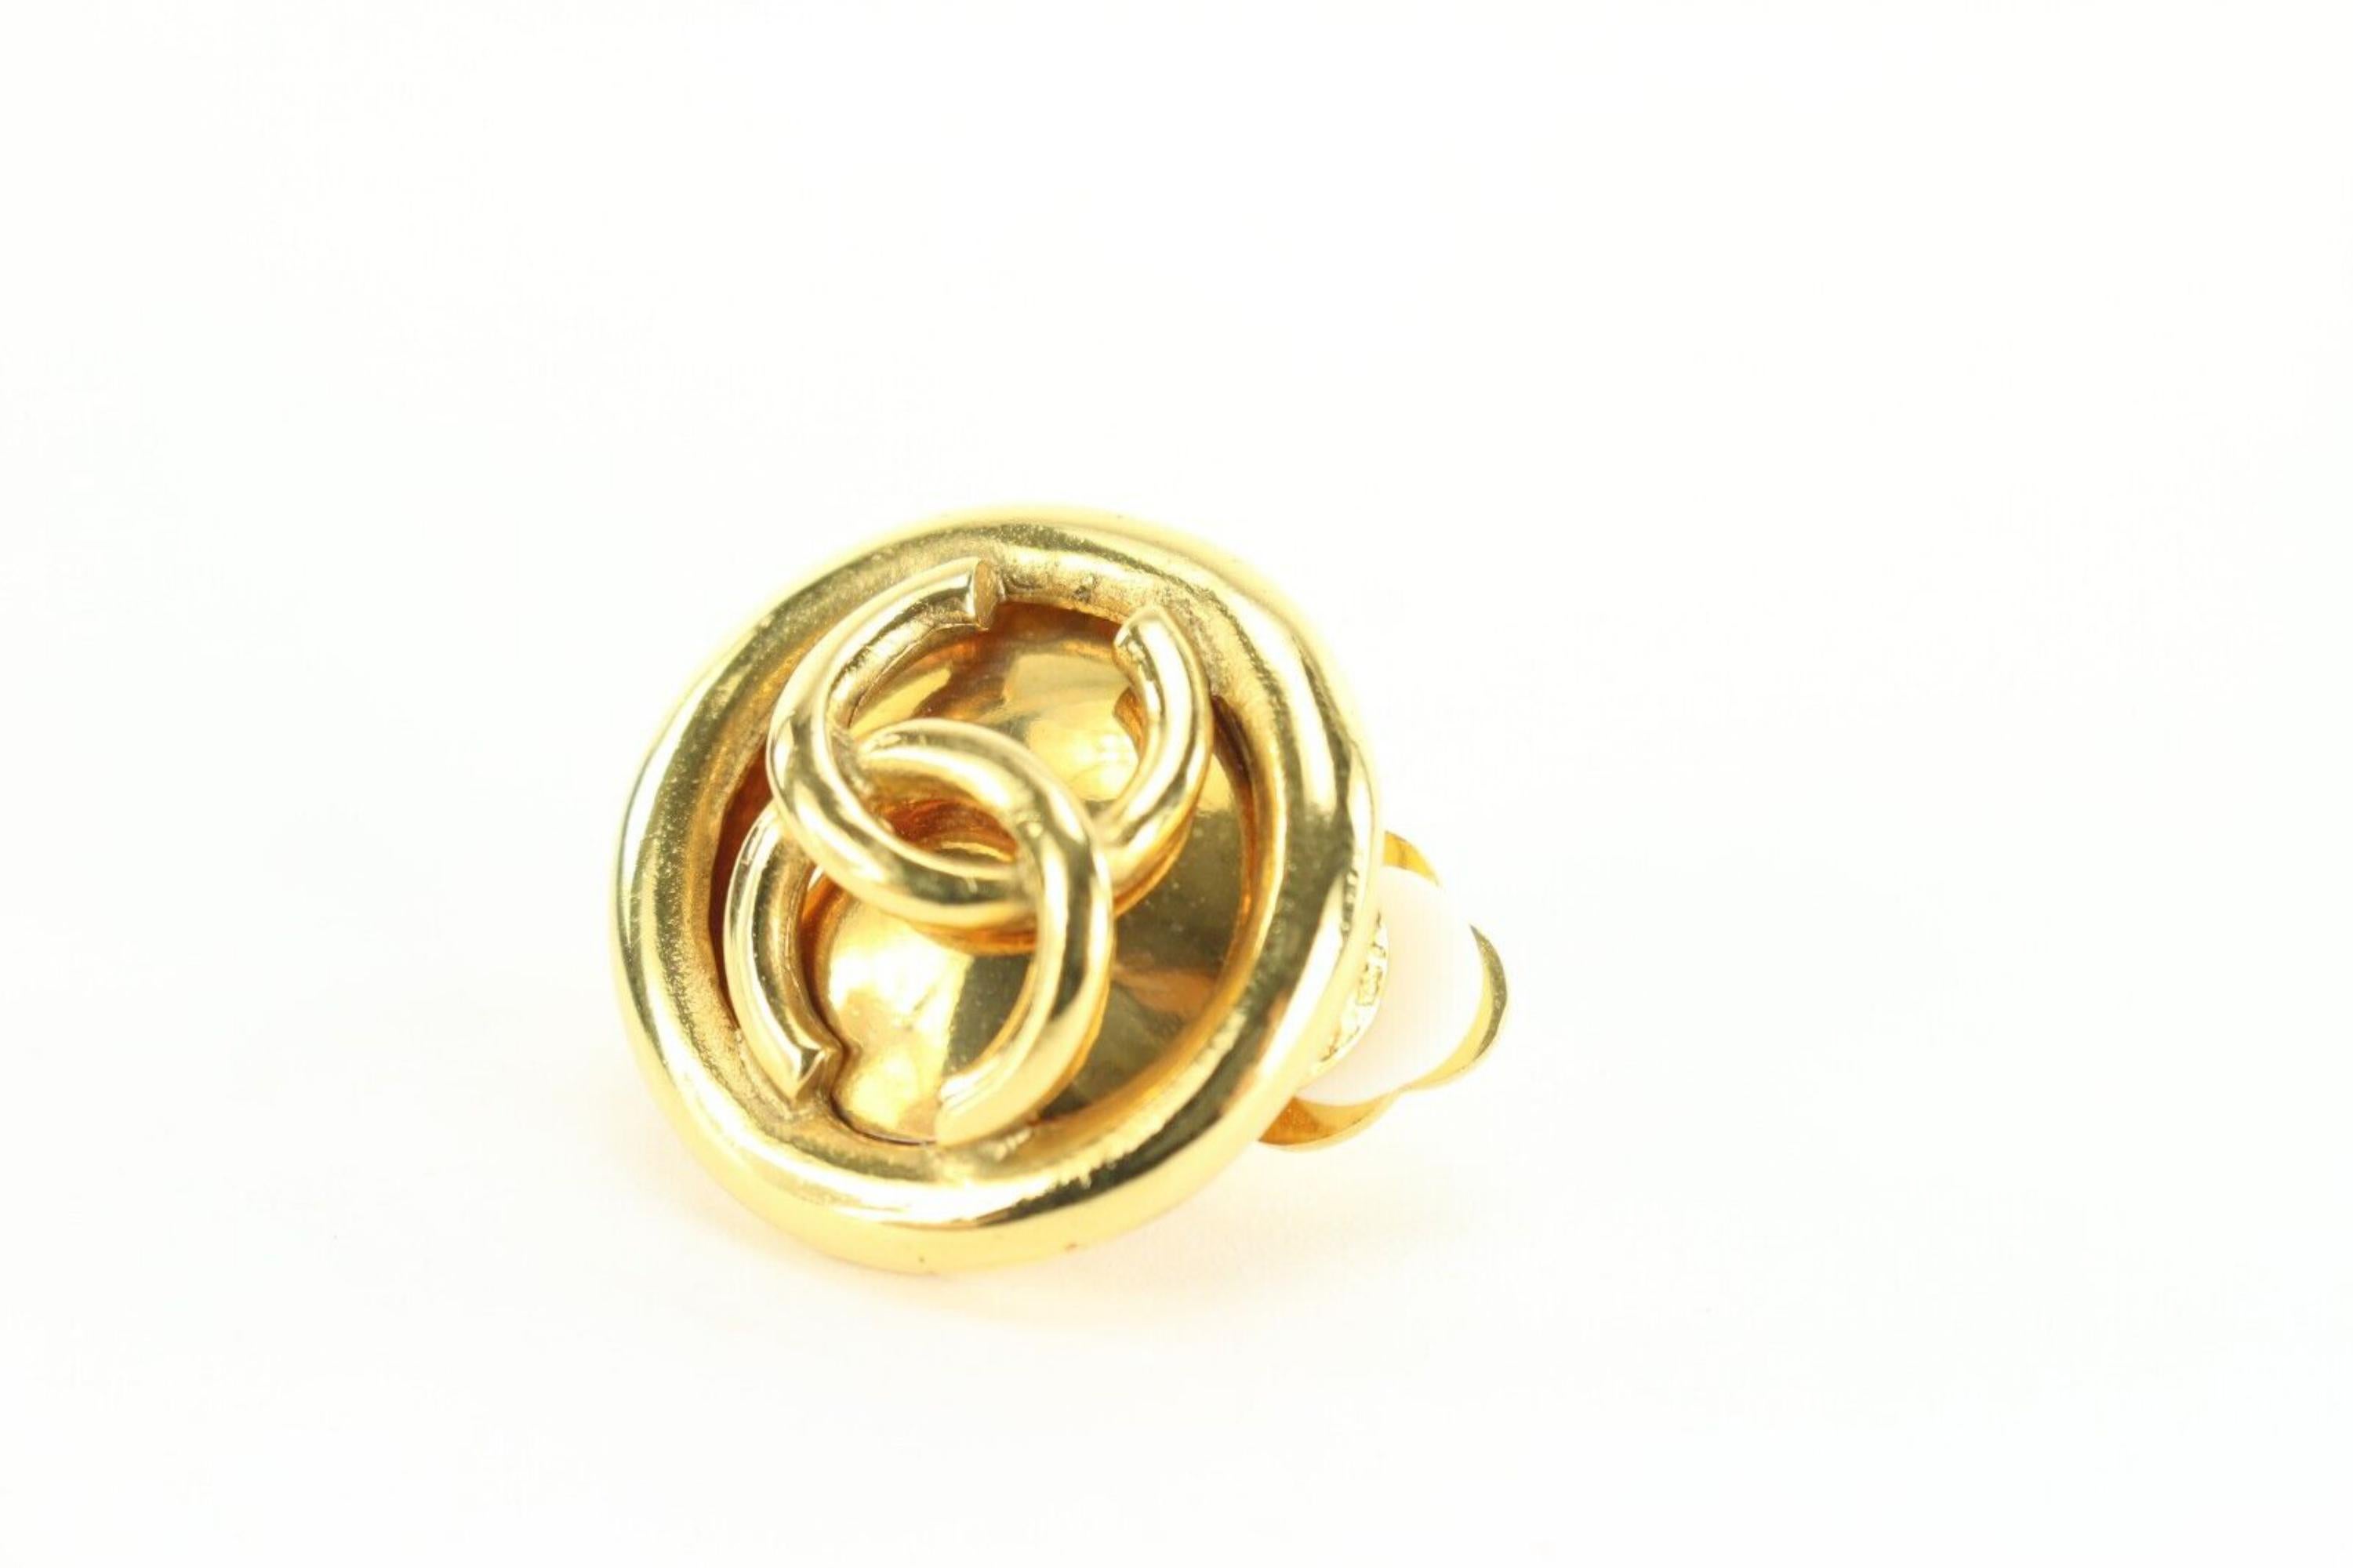 Chanel 24k Gold Plated CC Round Earrings Clip-On 1CK1202 4